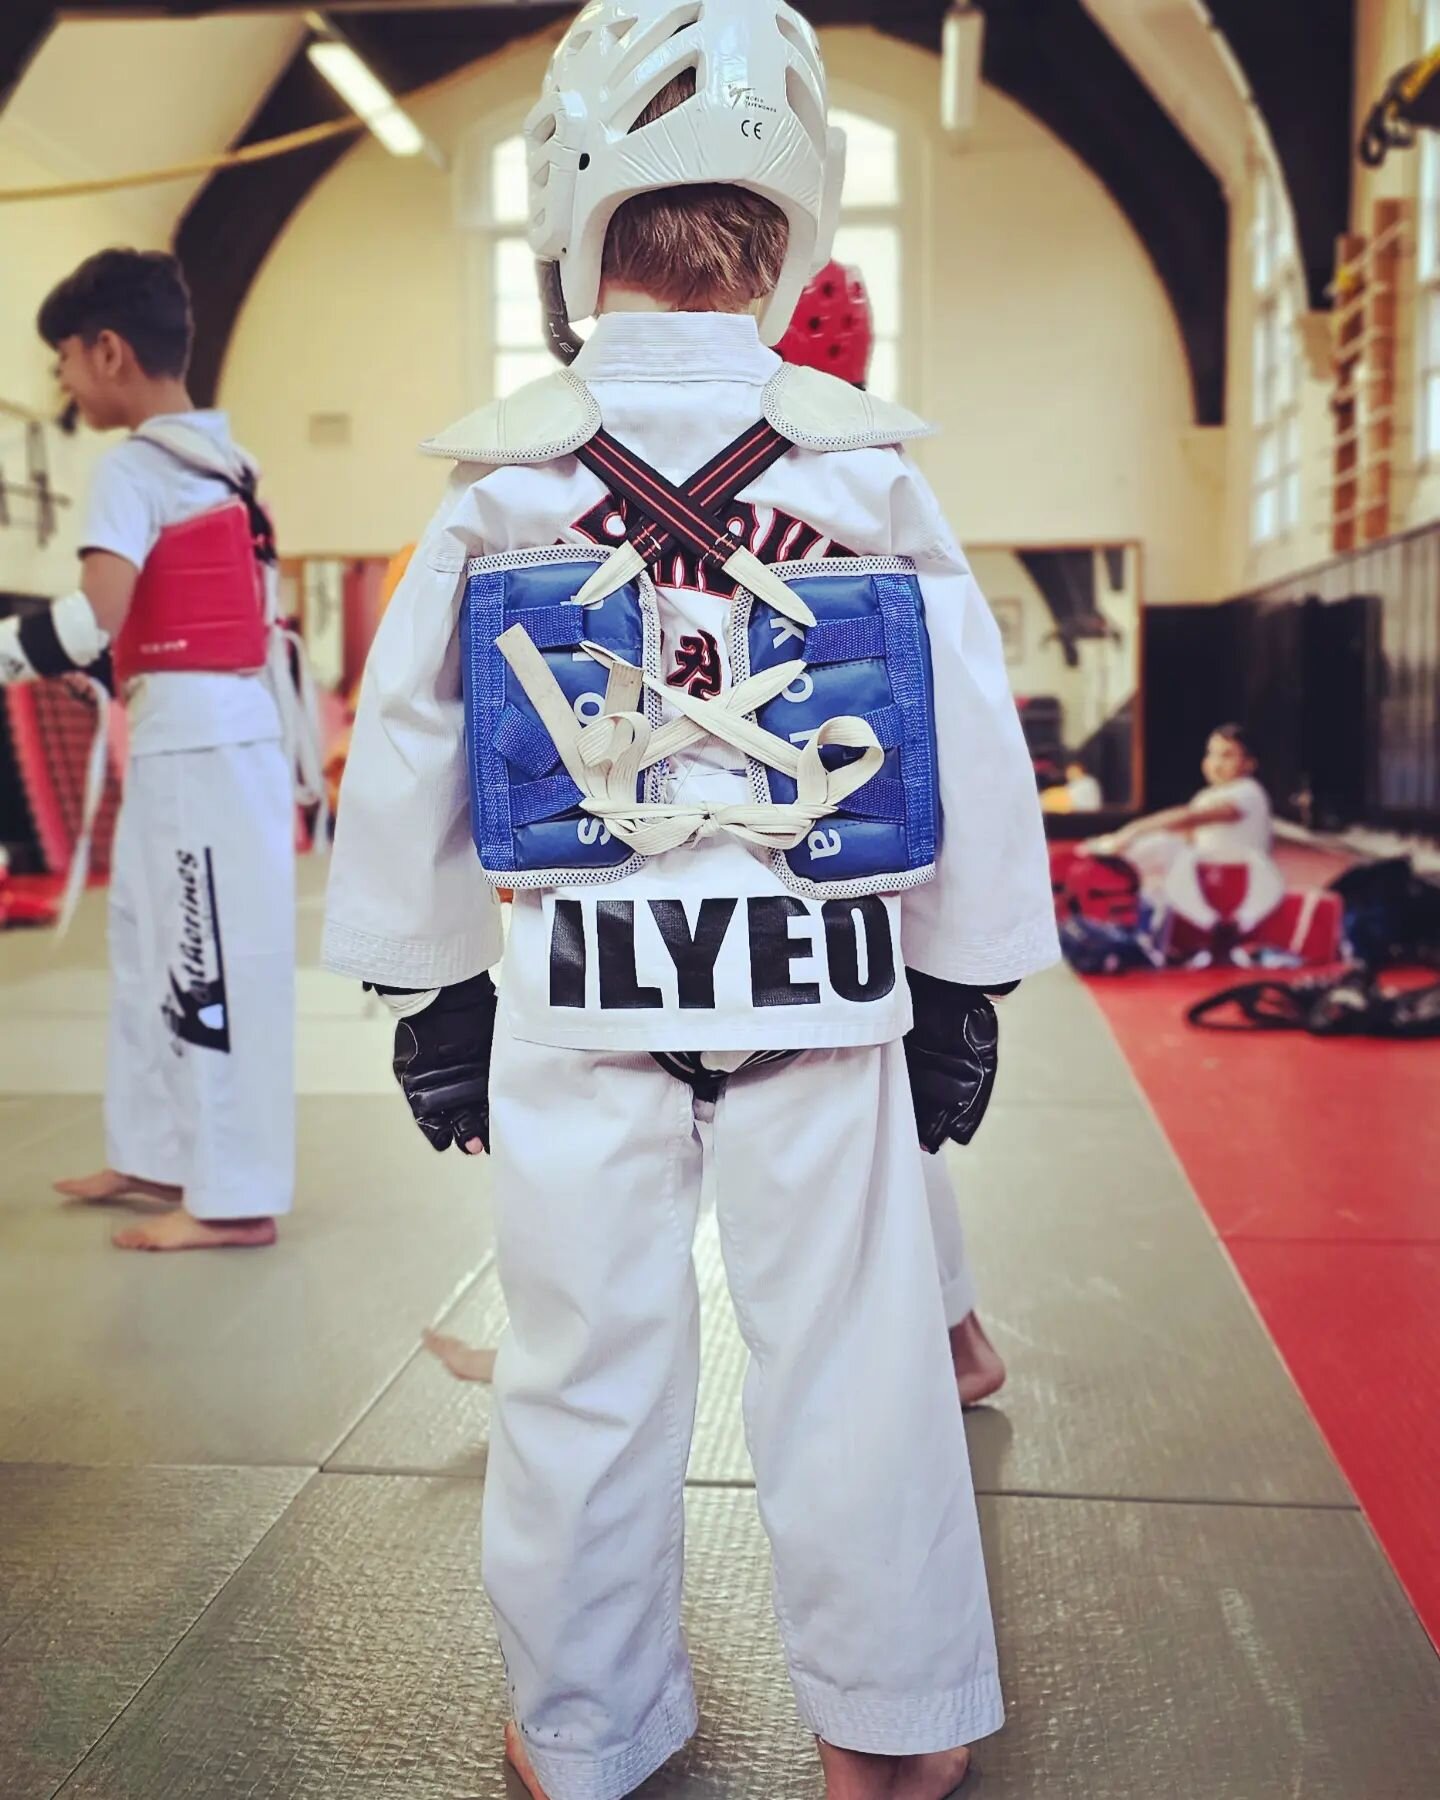 A journey of thousand miles begins with a single step 🥋 #teamilyeo 
.
.
.
.
.
#ilyeo #taekwondo #chiswickmartialarts #chiswickparents #chiswick #westlondon #childrensactivities